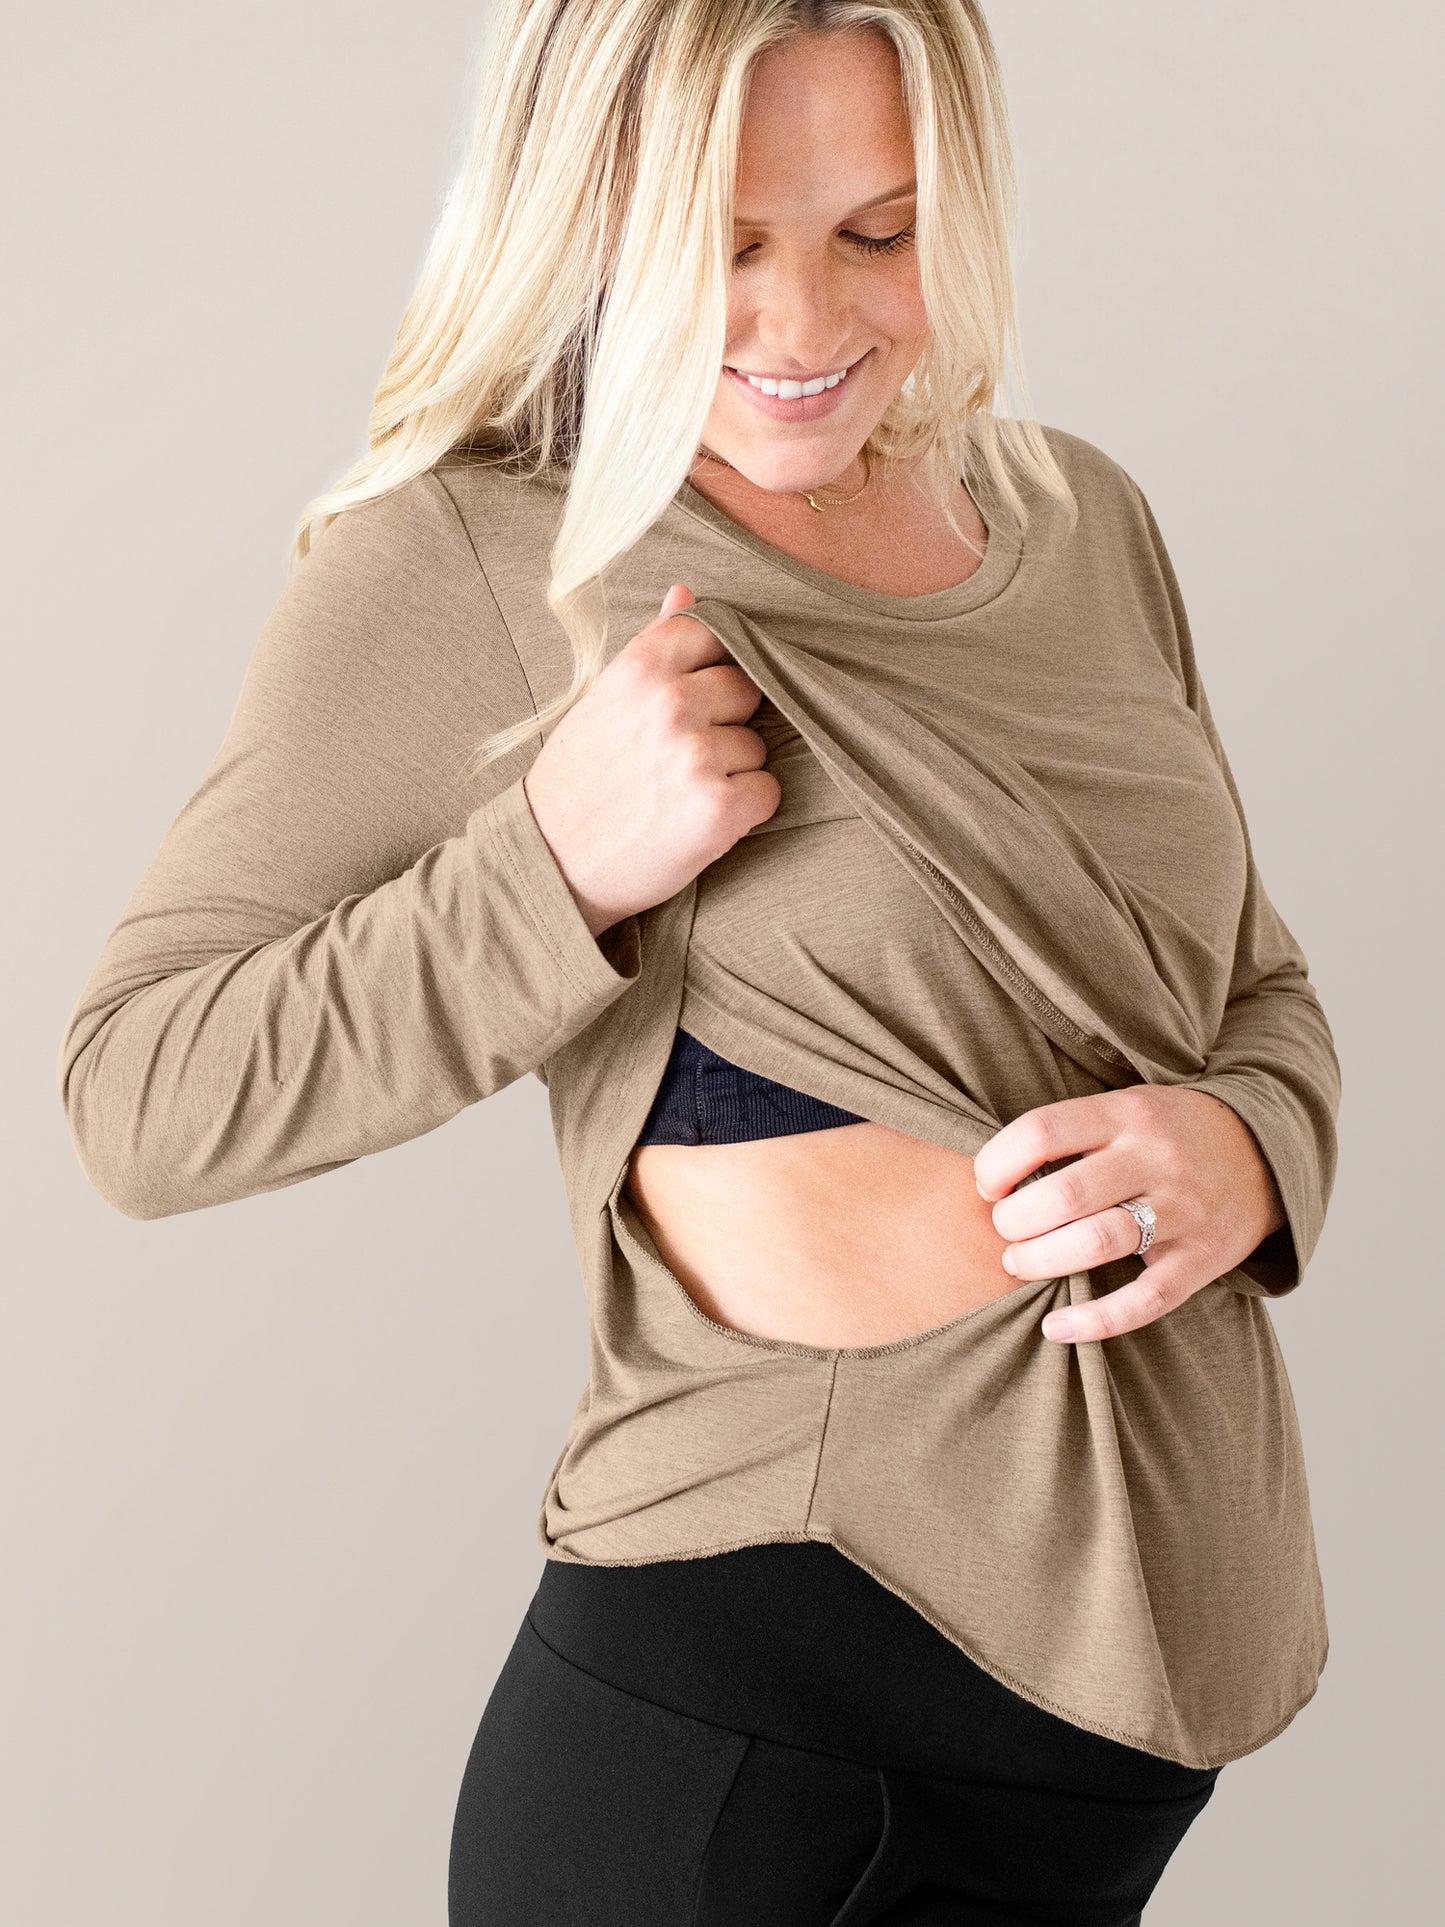 Model wearing the Bamboo Maternity & Nursing Long Sleeve T-shirt in Wheat holding up the nursing panel.